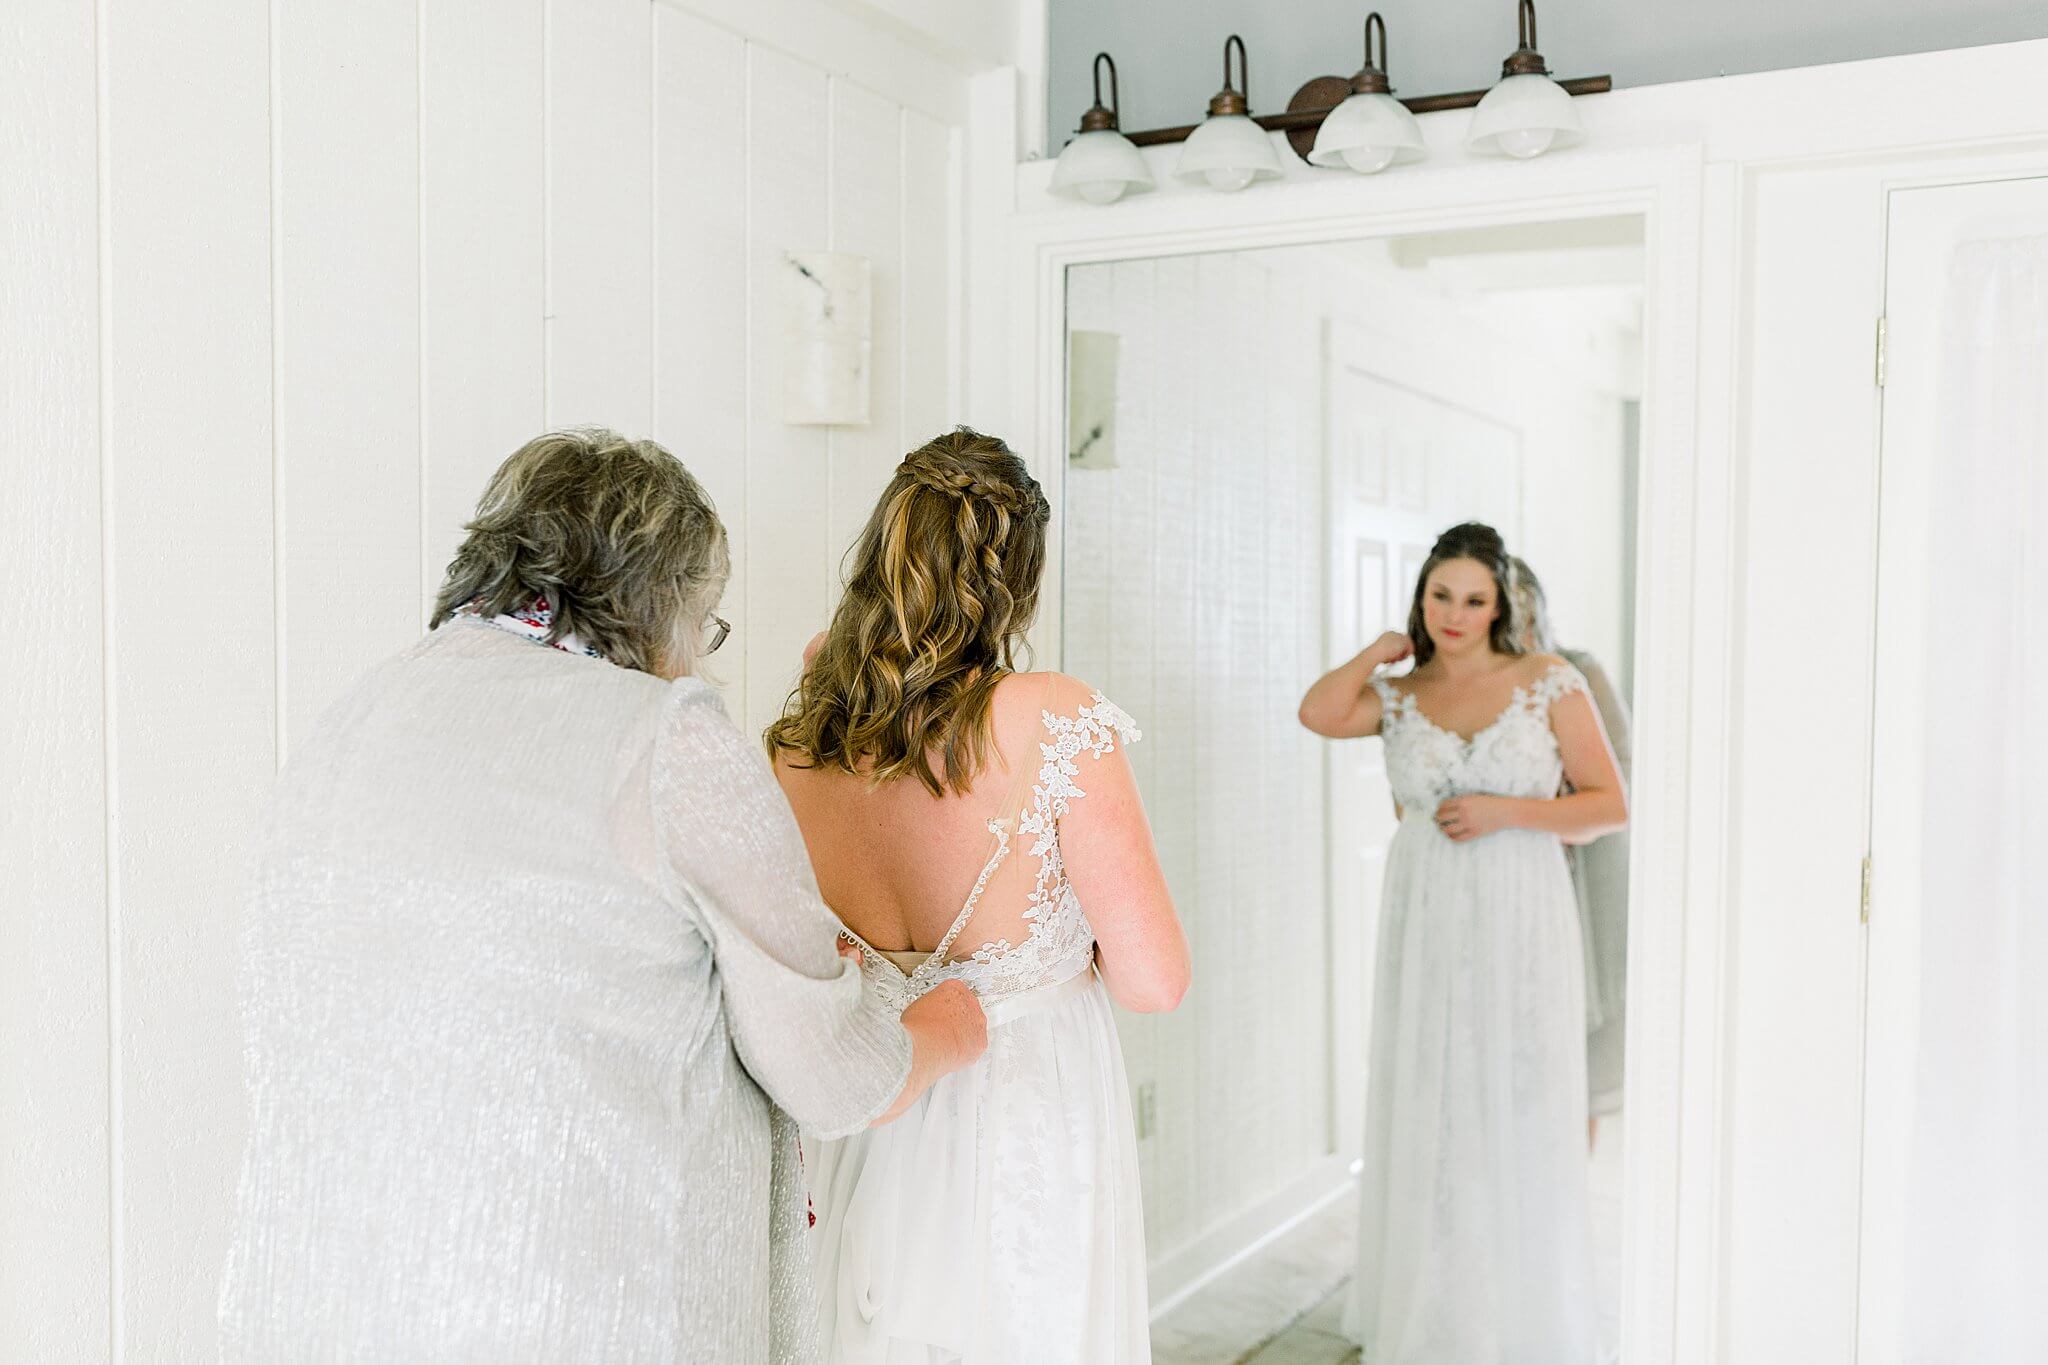 Bride getting dressed in bridal suite during Timberlee Hills Wedding in Traverse City, Northern Michigan.